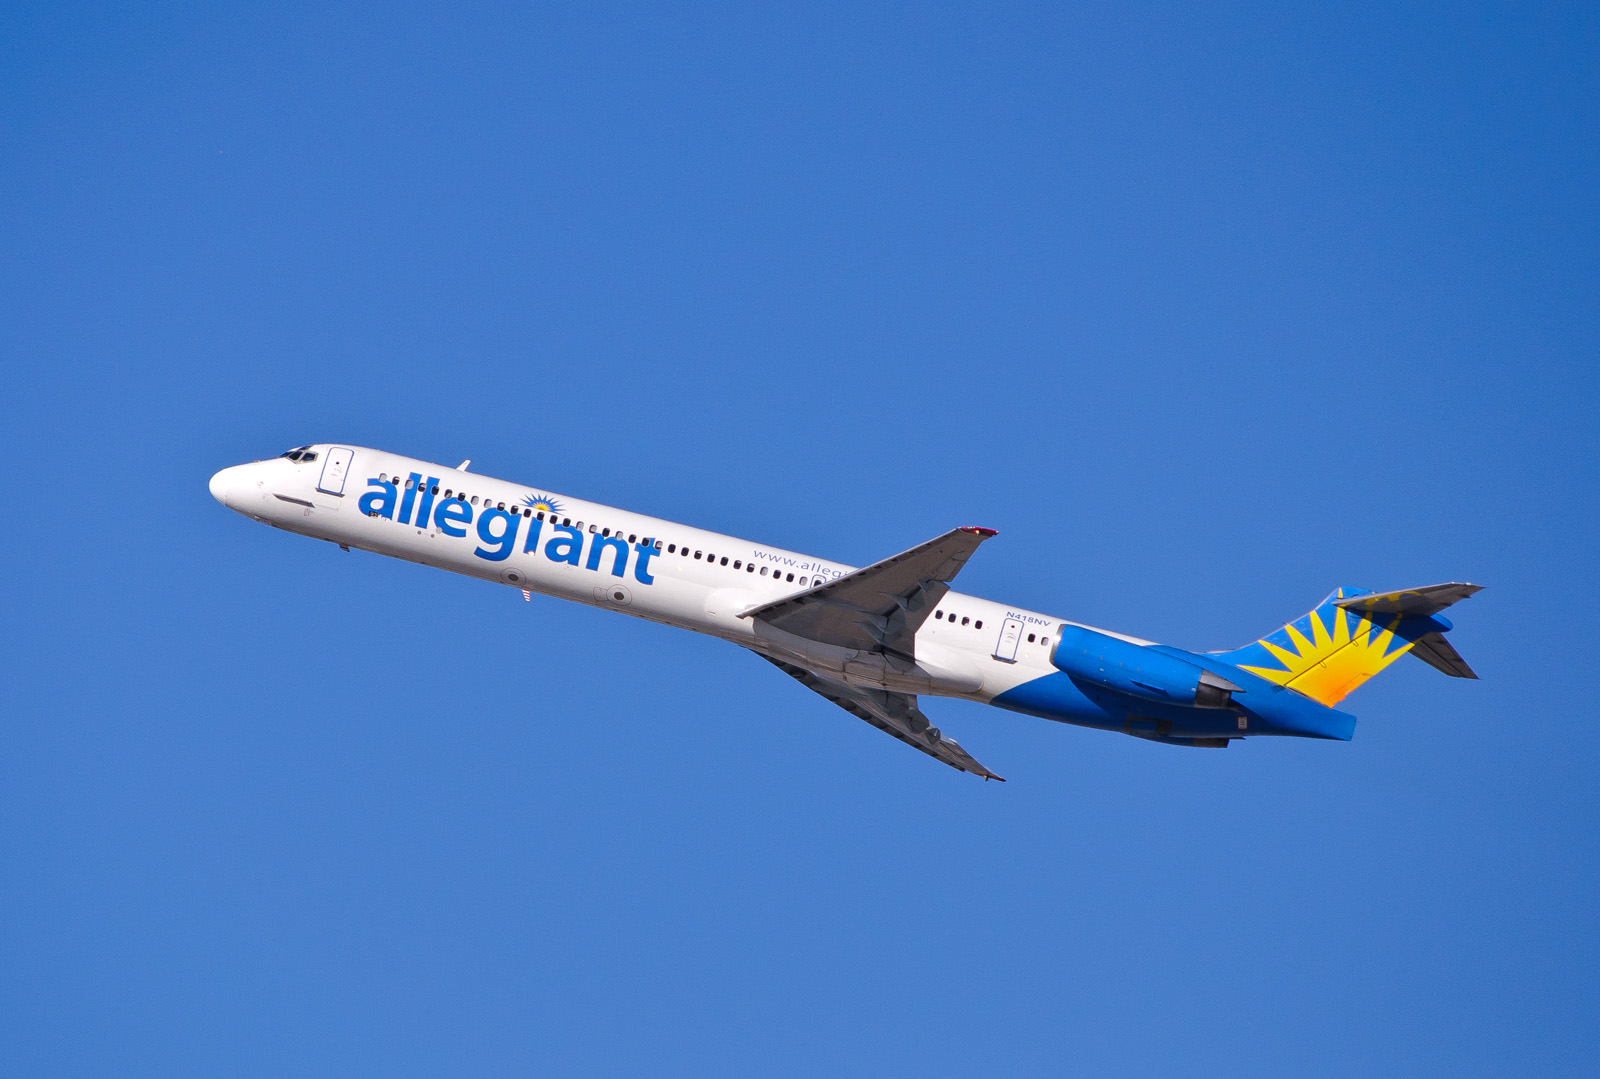 Allegiant Airlines missed the boat (er, plane?) in telling its story